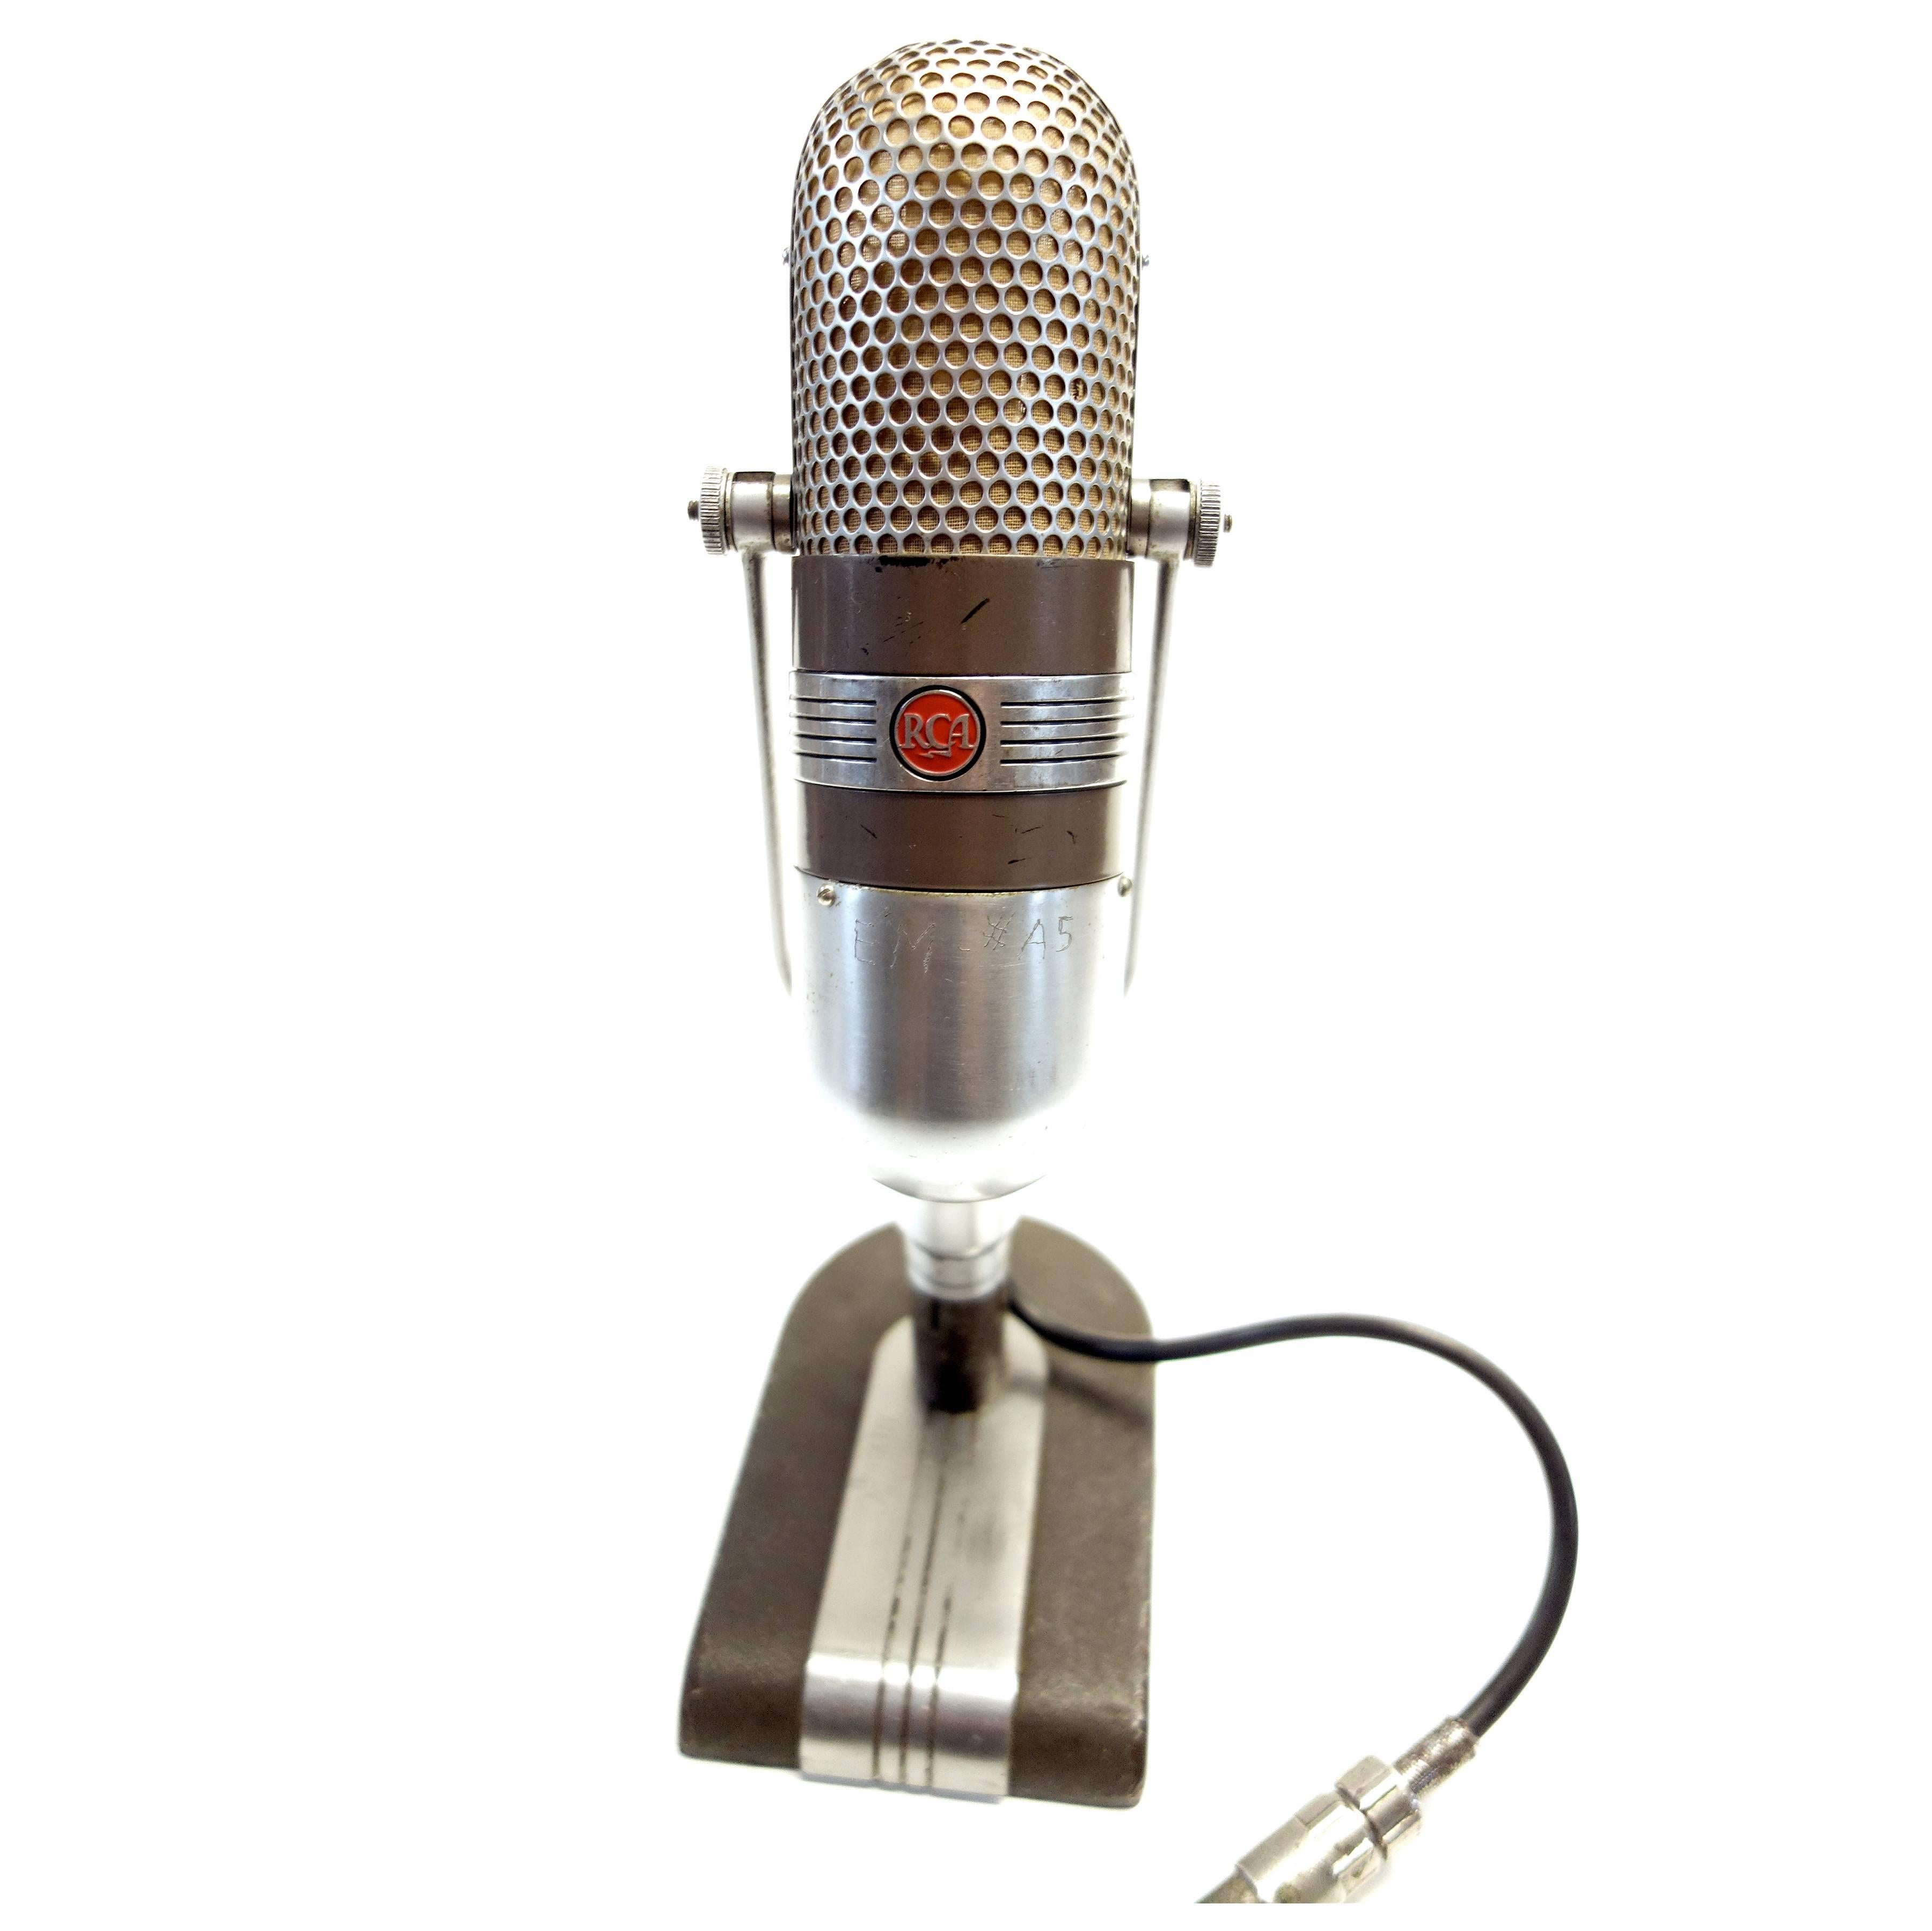 Coach Bear Bryant Use History Iconic 1950s RCA Studio Mic As Sculpture ON SALE For Sale